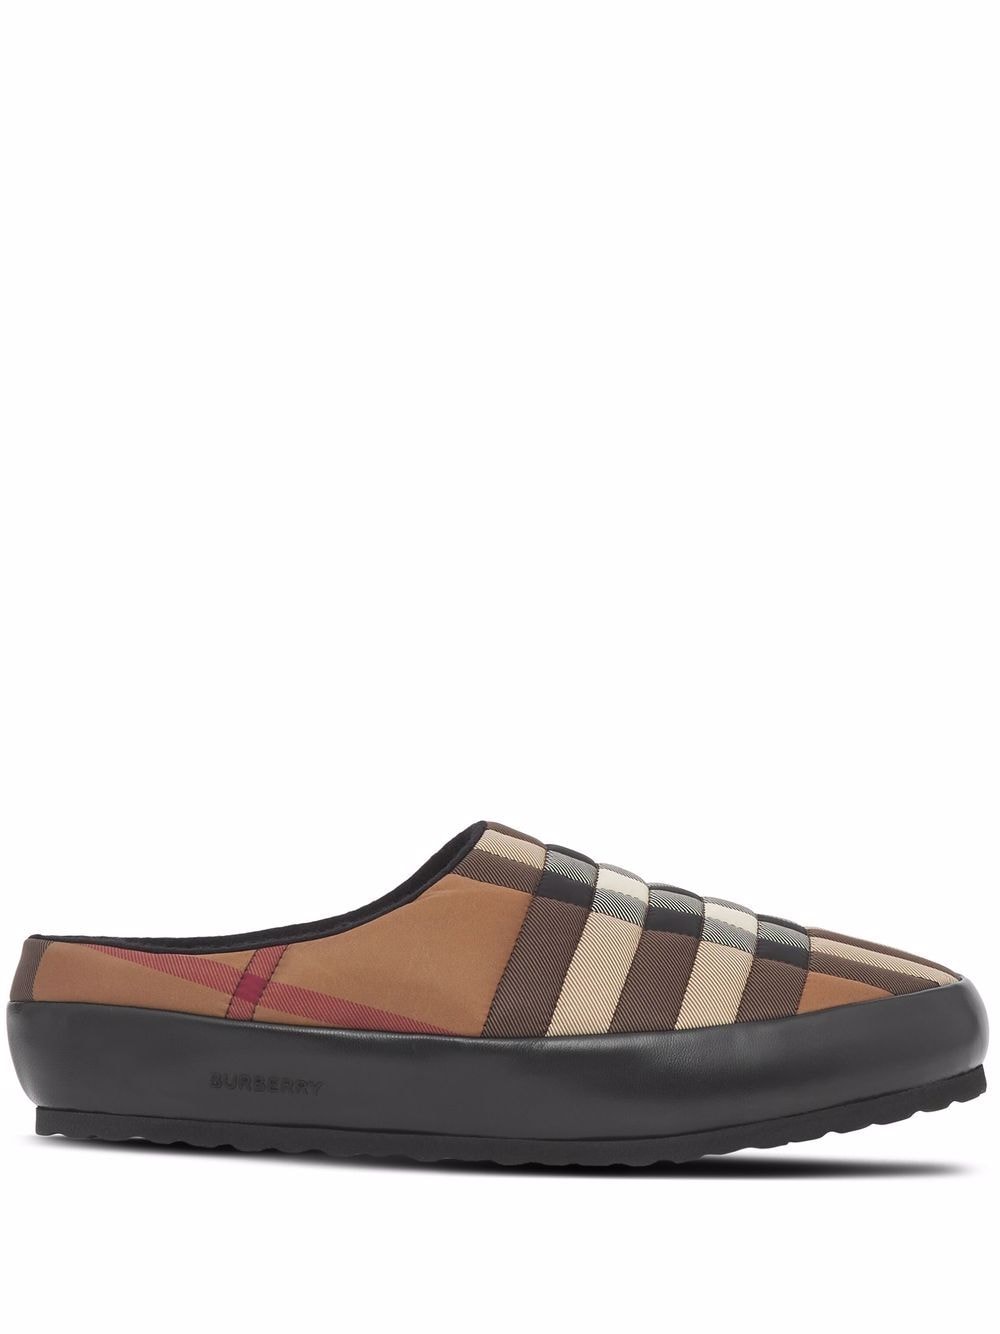 Burberry check-pattern slippers - Brown von Burberry